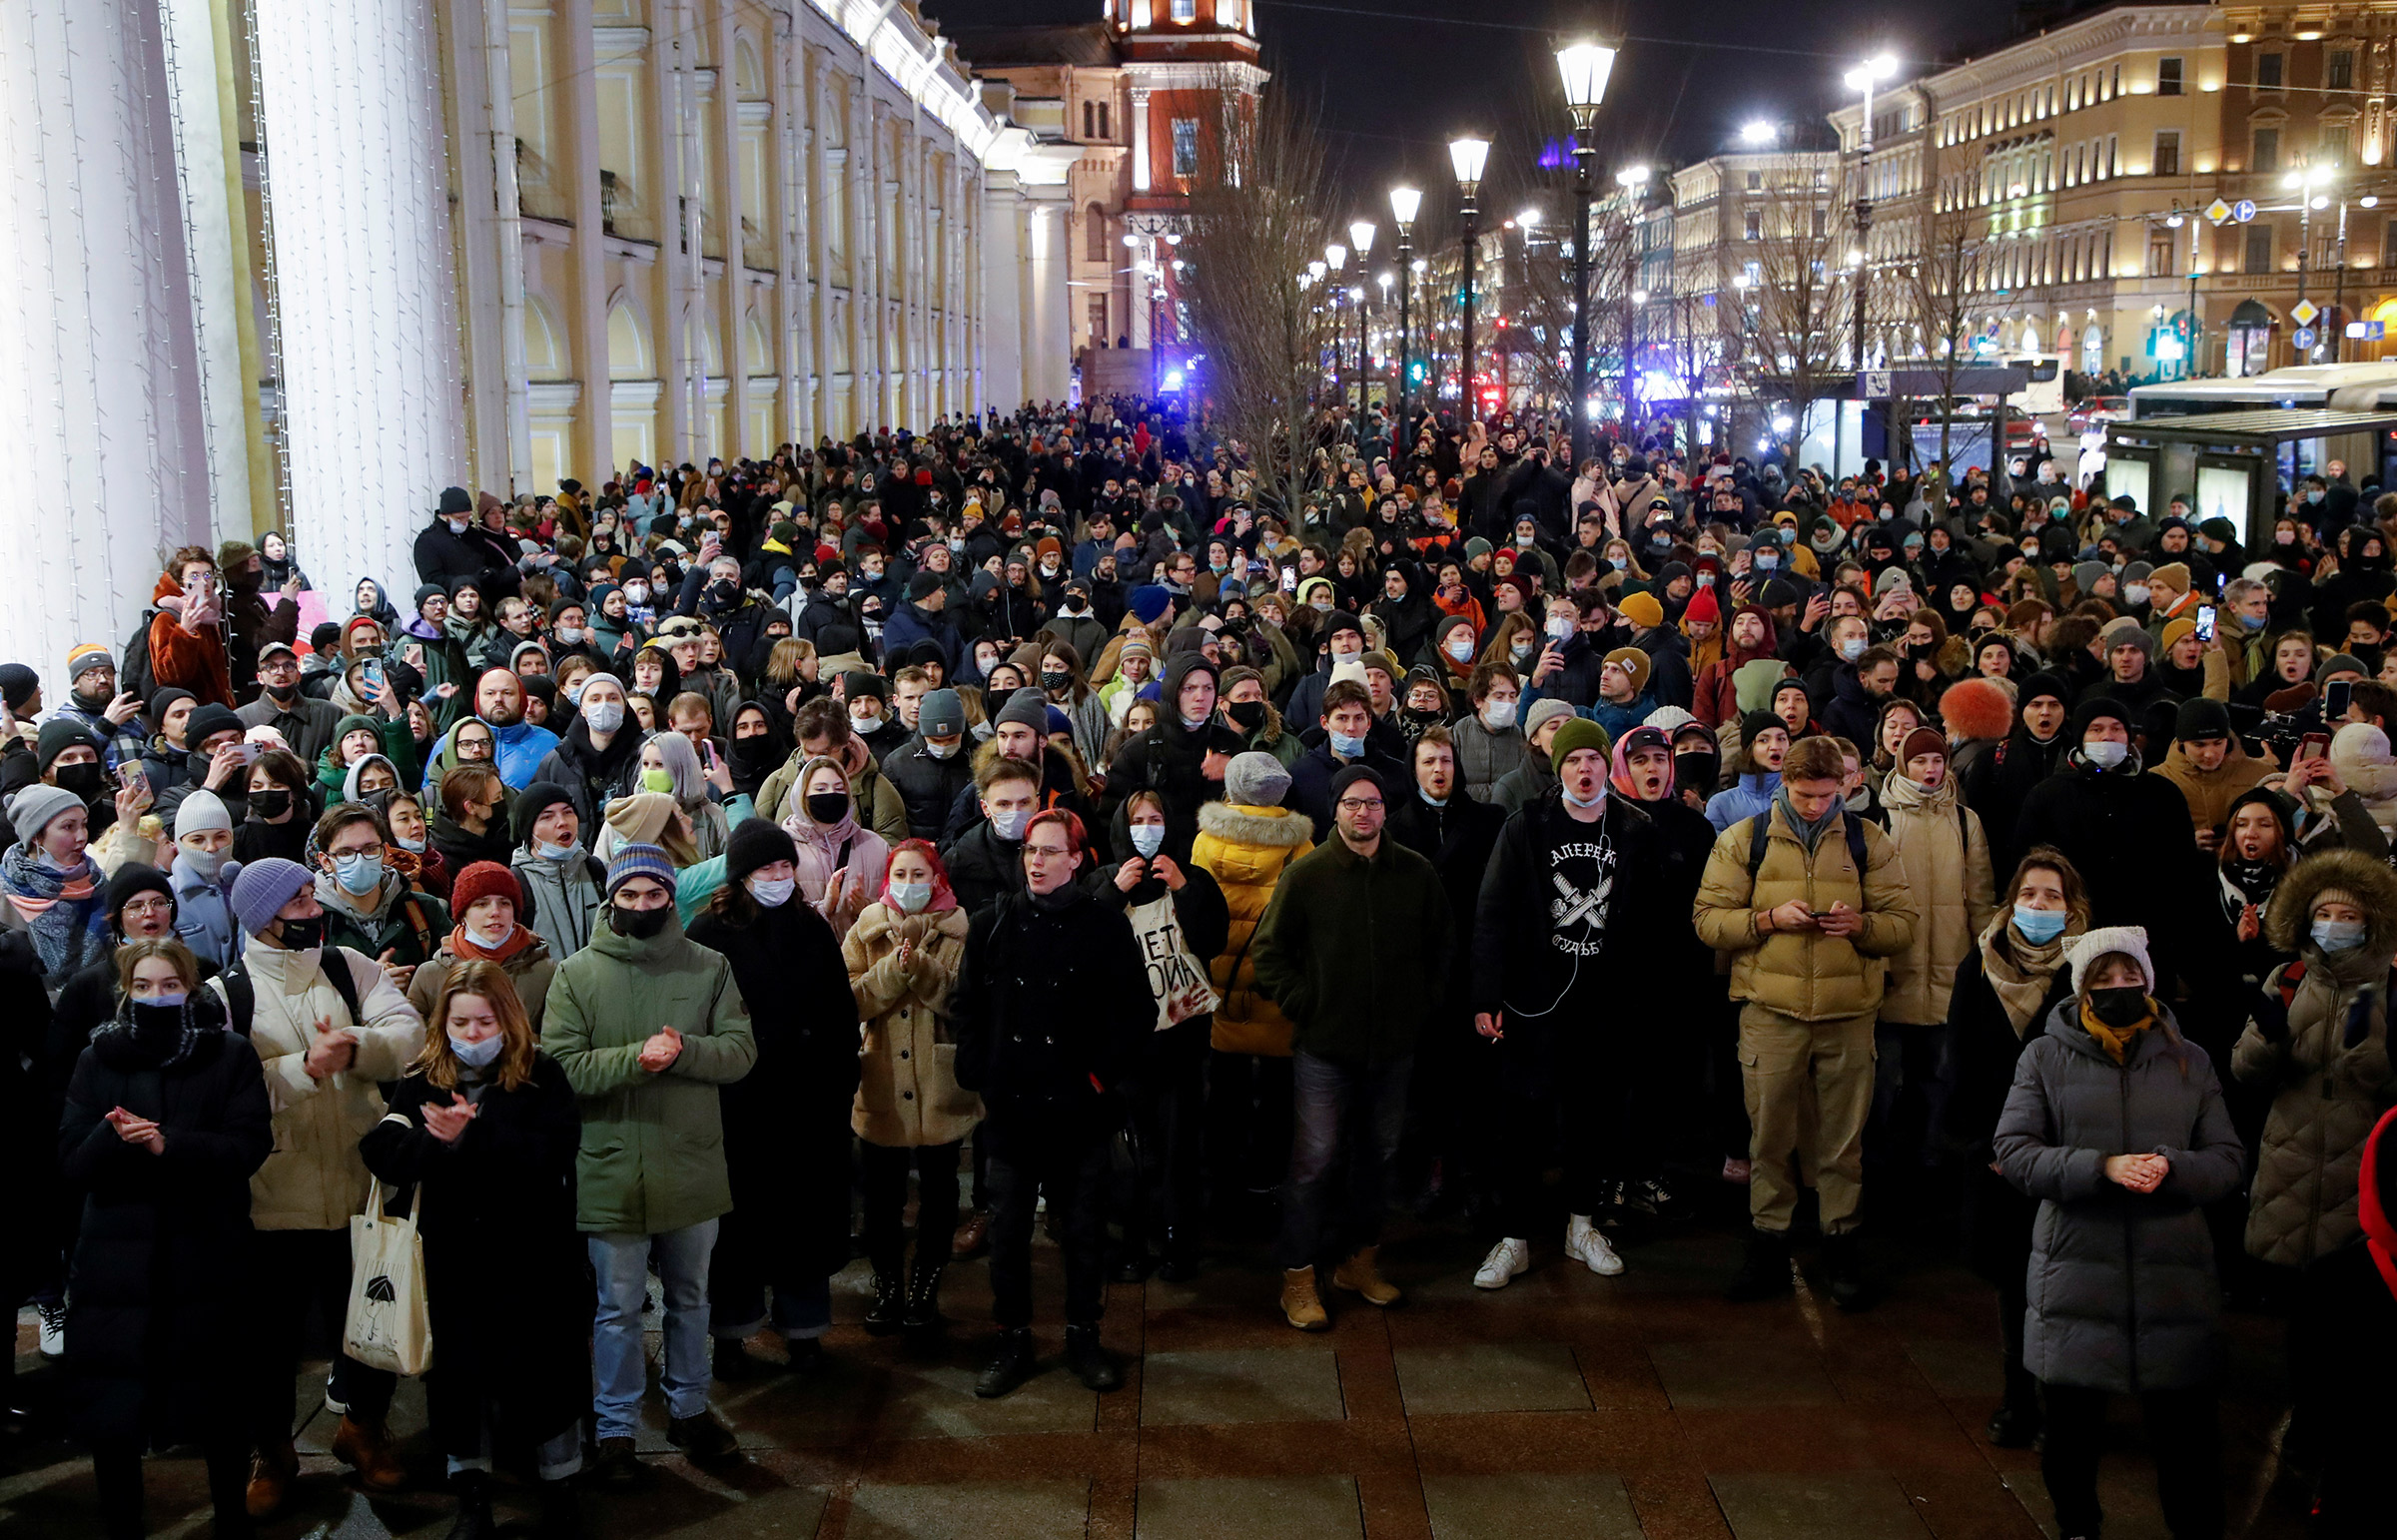 People attend an anti-war protest in Saint Petersburg, Russia, on Feb. 24, 2022 after Russian President Vladimir Putin authorized a military operation in Ukraine. (Anton Vaganov—Reuters)